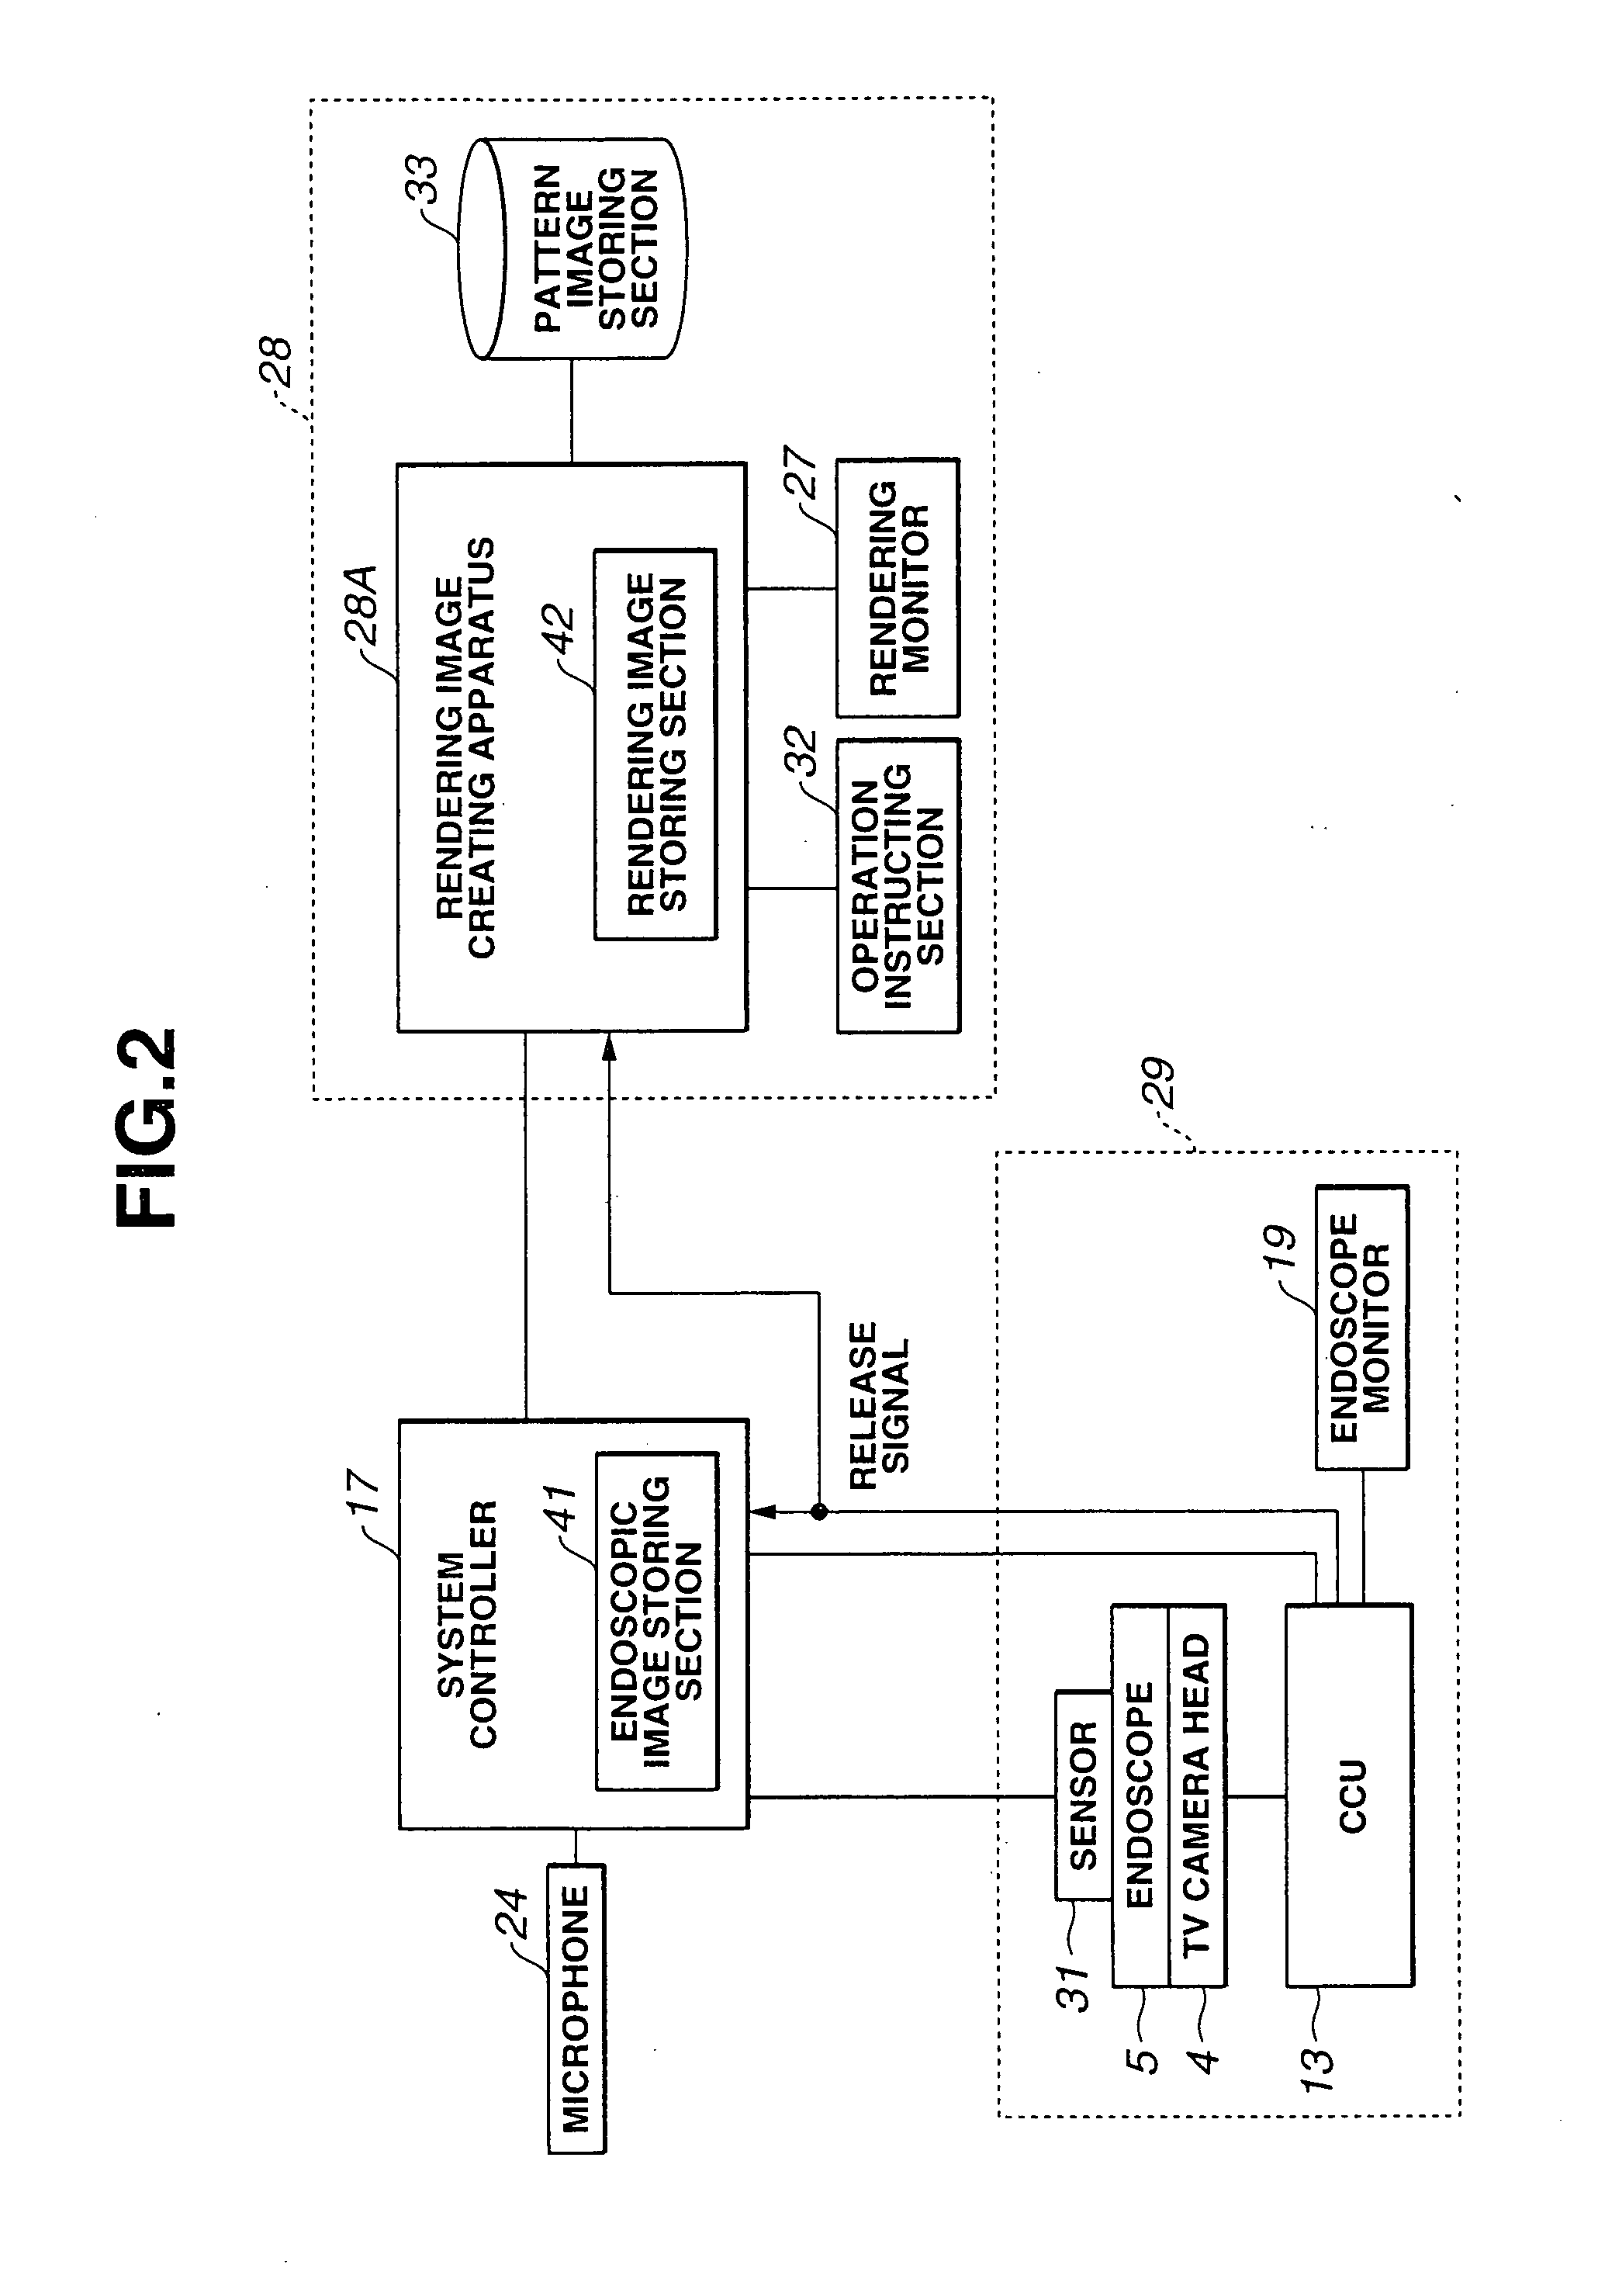 Object observation system and method of controlling object observation system